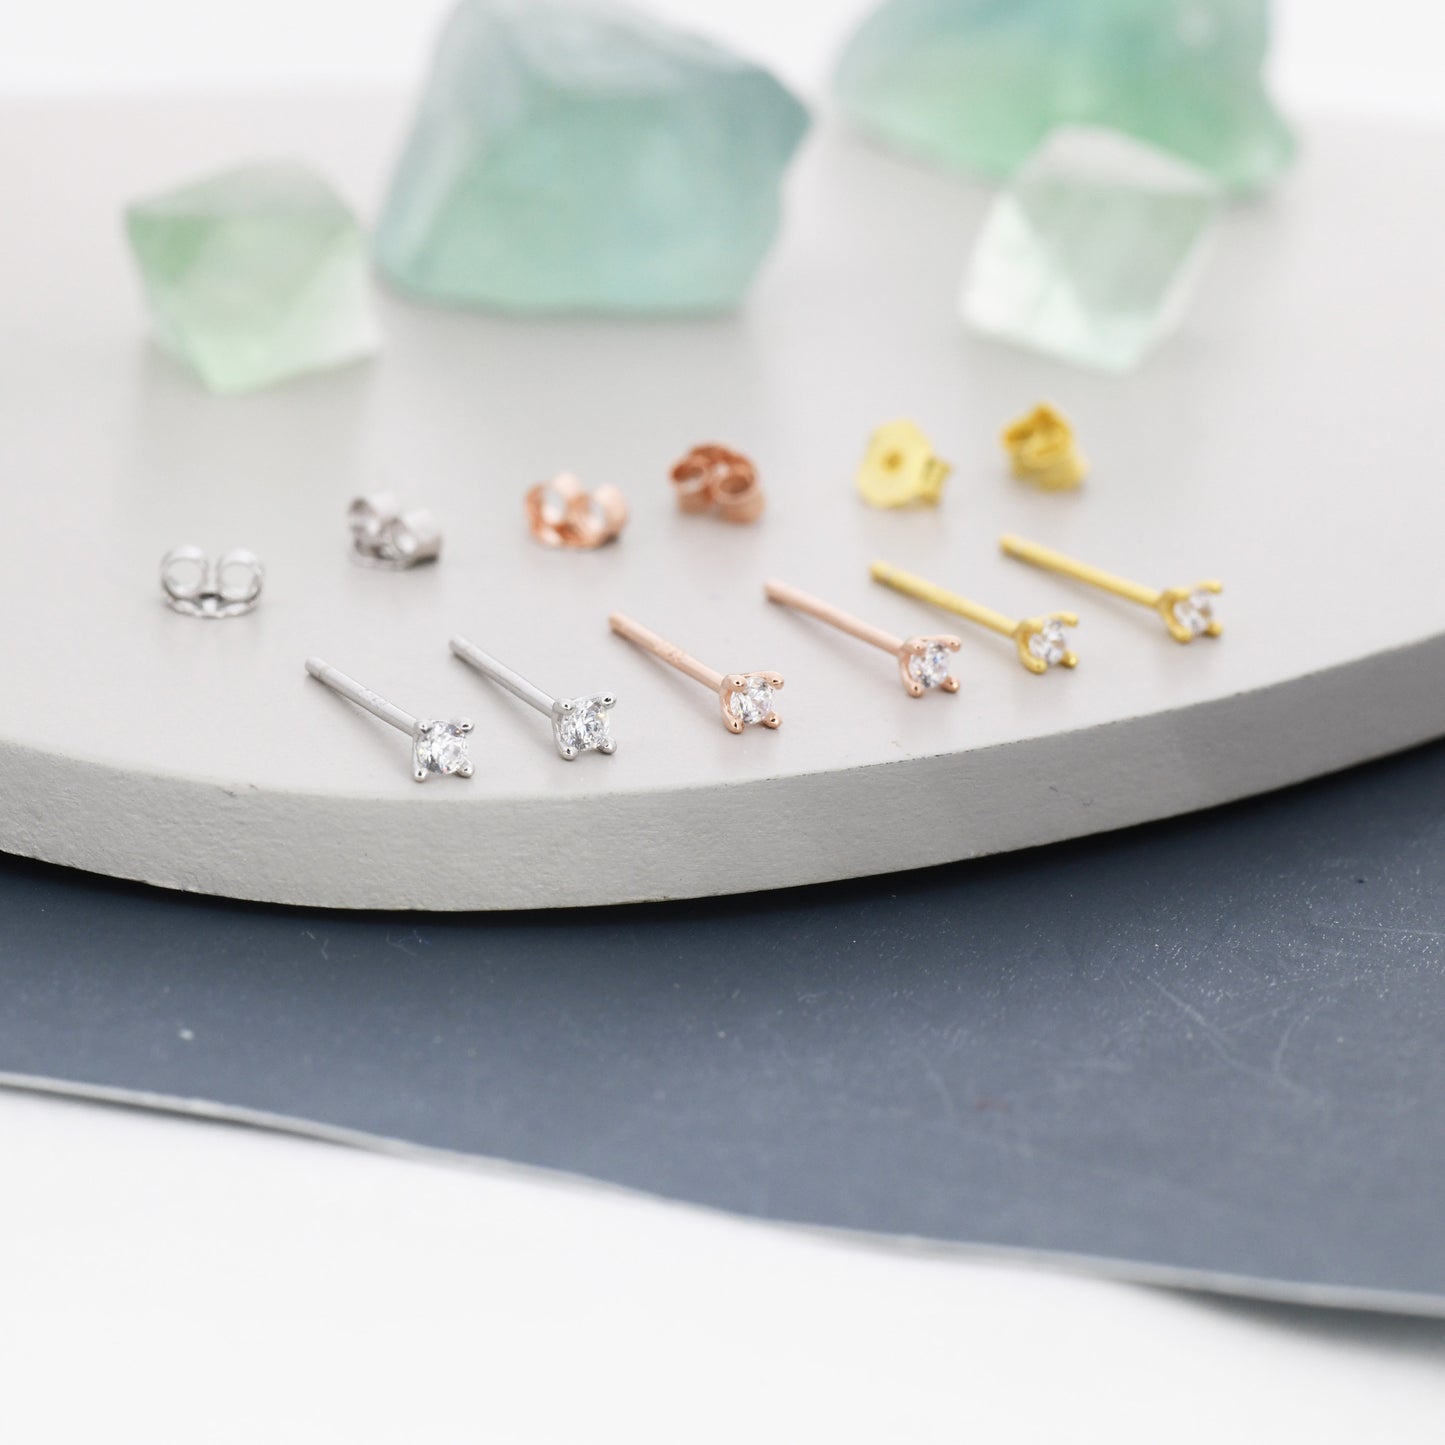 Barely Visible 2mm CZ Stud in Sterling Silver, Silver, Gold or Rose Gold,  Extra Tiny CZ Stud